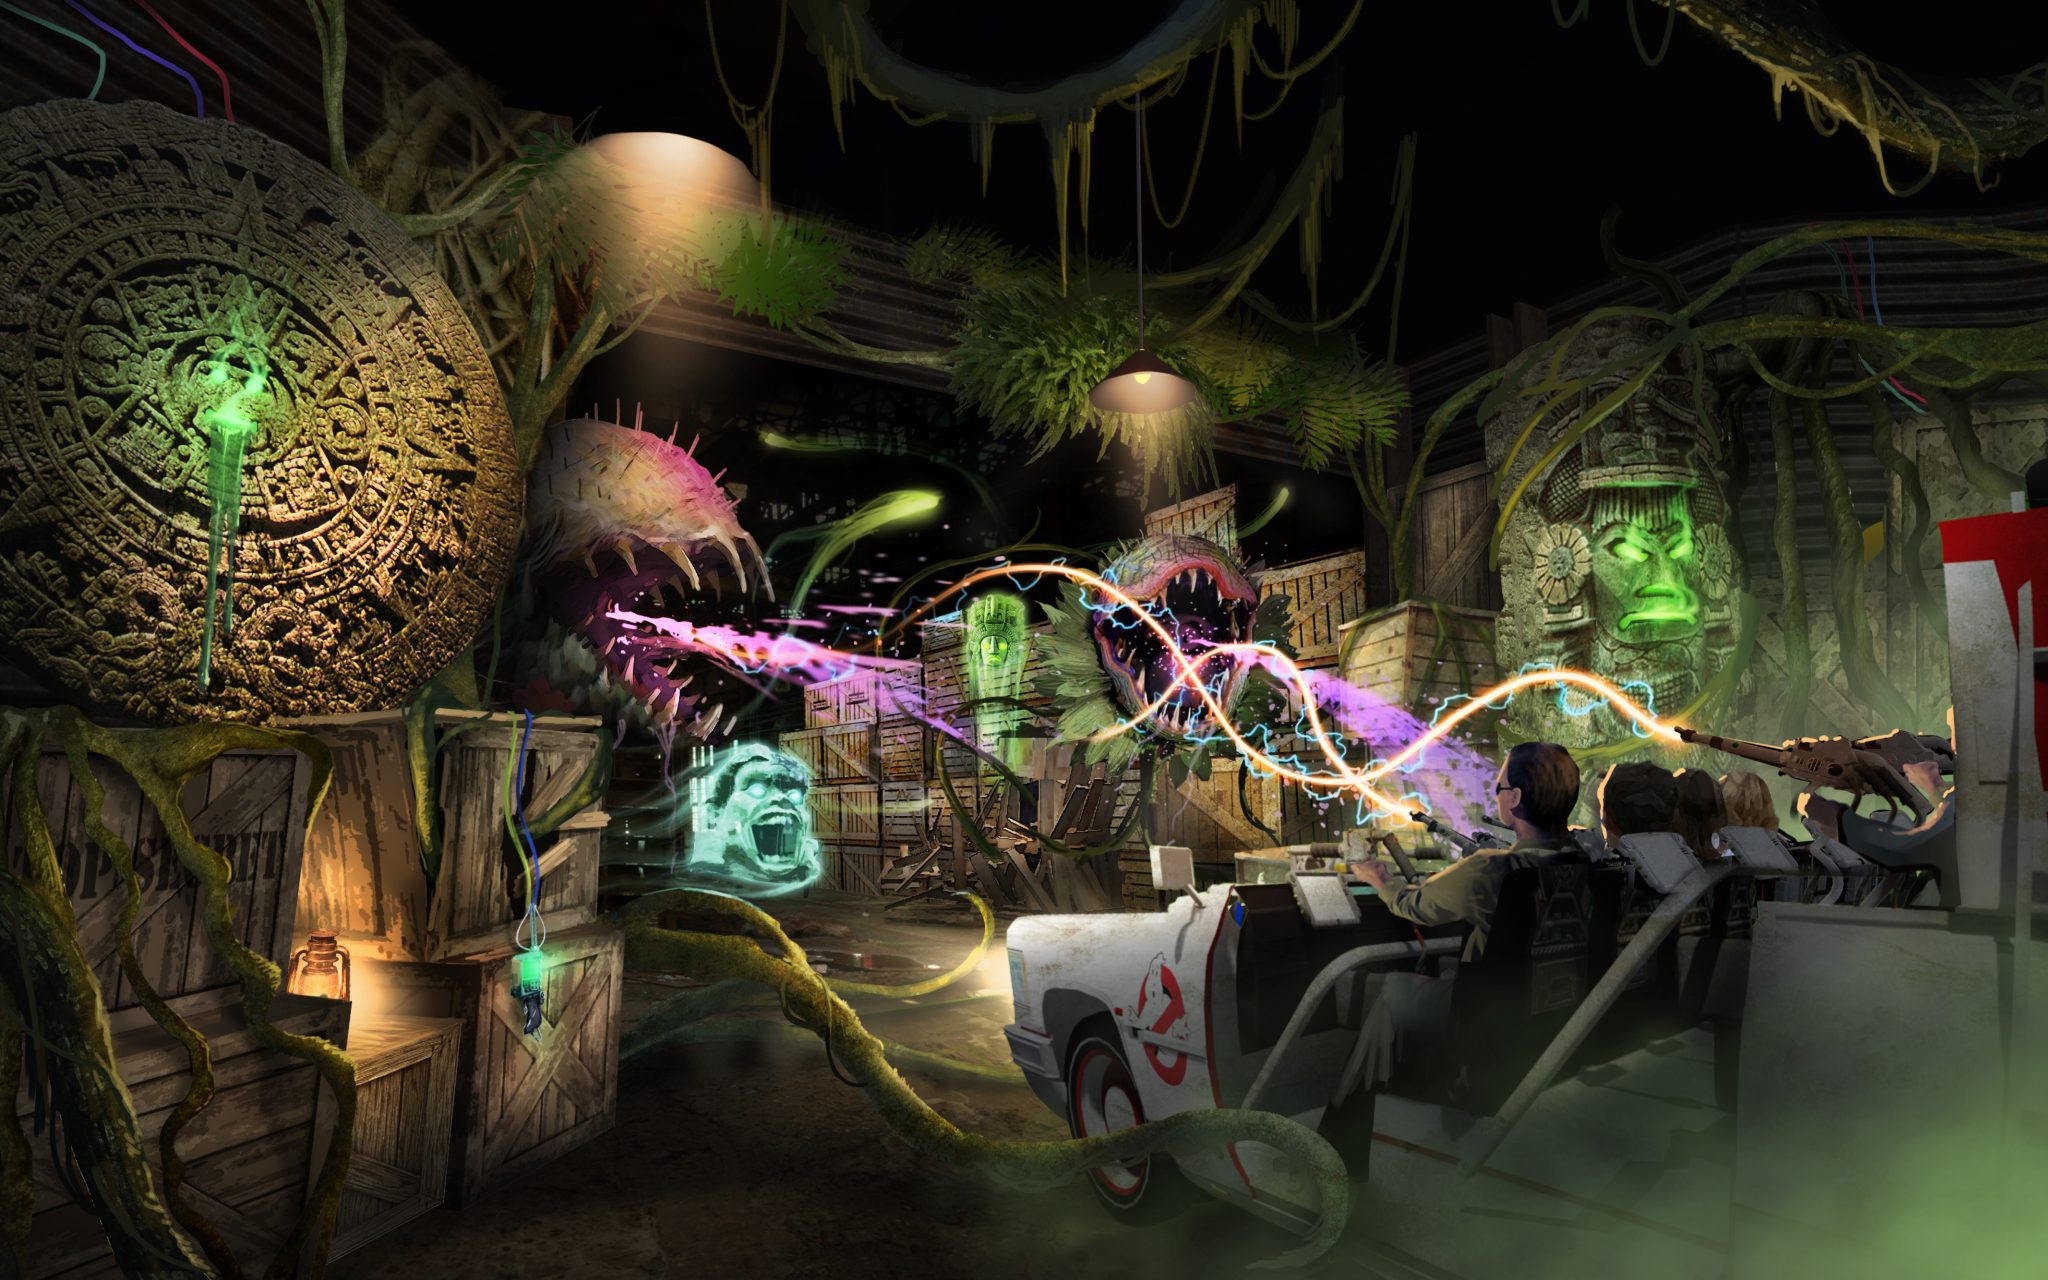 A concept image of inside a Ghostbusters ride with people shooting coloured rays from a Ghostbusters car